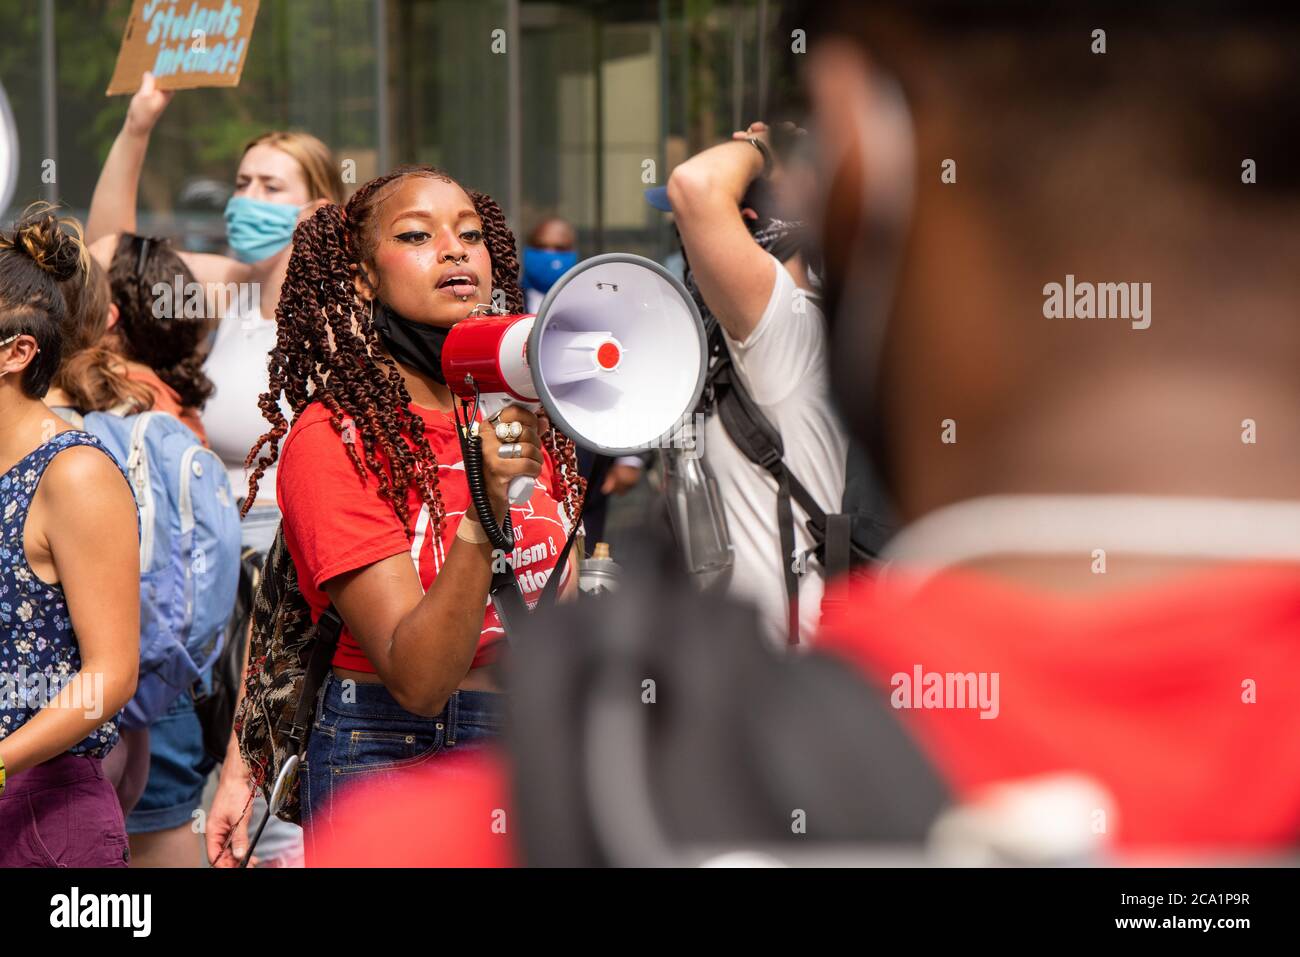 Philadelphia / USA. About one hundred people gathered at Comcast's national headquarters as part of a day of action across the country calling for equitable access to internet for all students in Philadelphia August 03, 2020. Credit: Chris Baker Evens / Alamy Lives News. Stock Photo